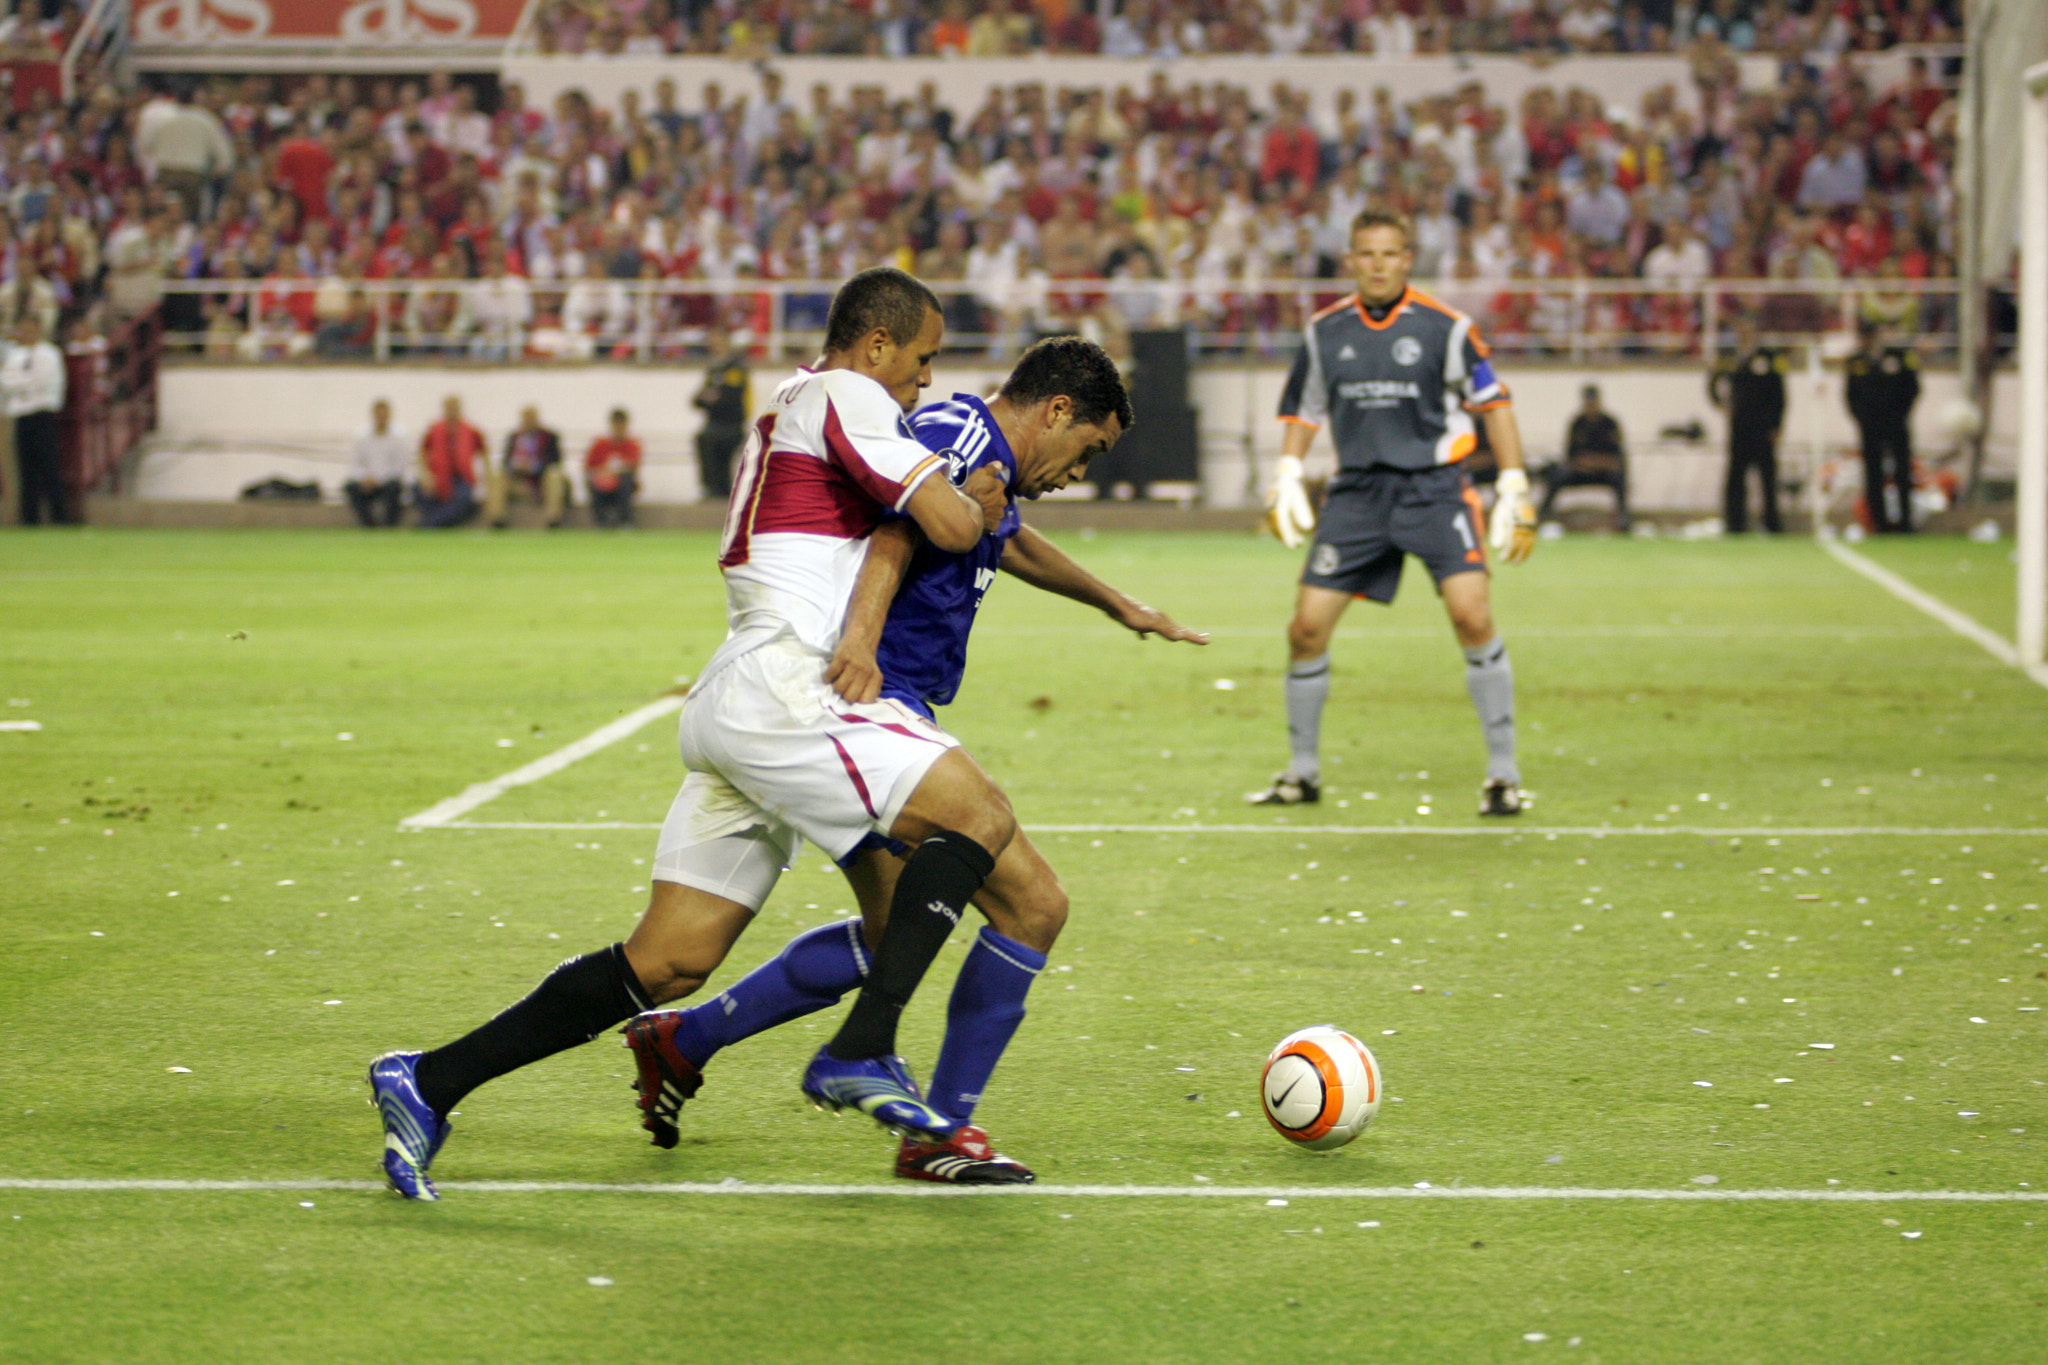 Luis Fabiano and Rodriguez fighting for the ball